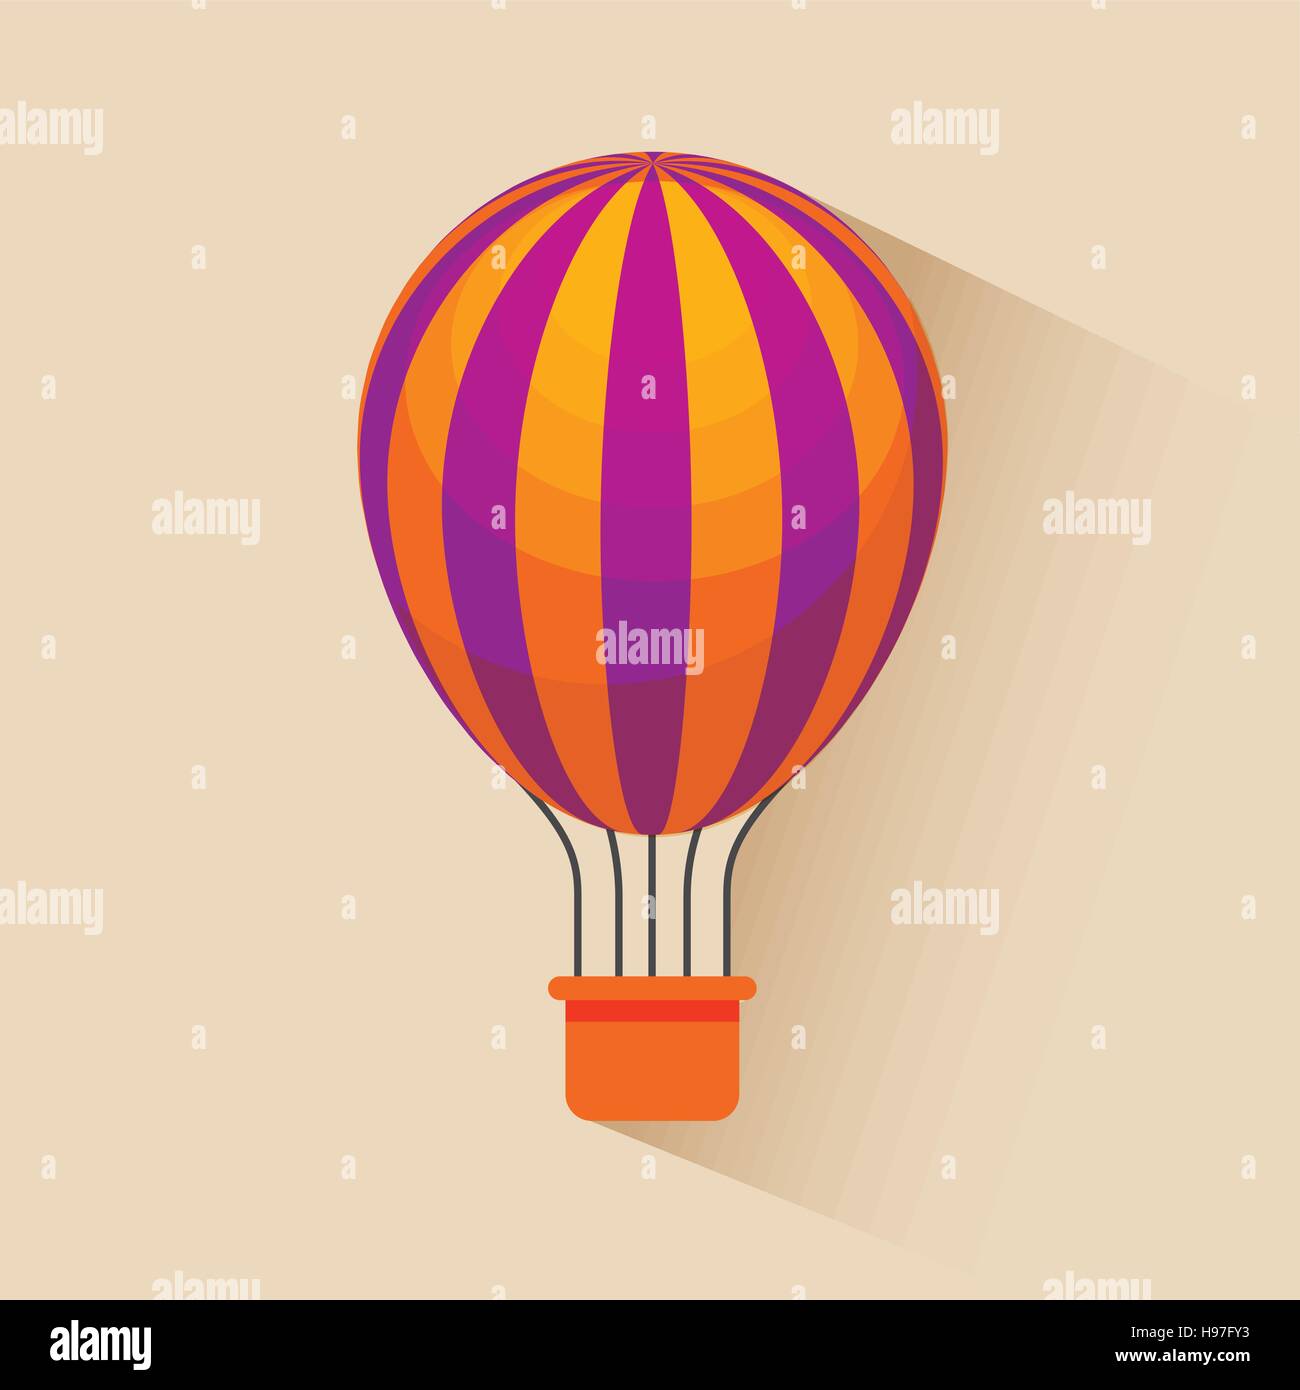 air balloon icon over yellow background. colorful design. vector illustration Stock Vector